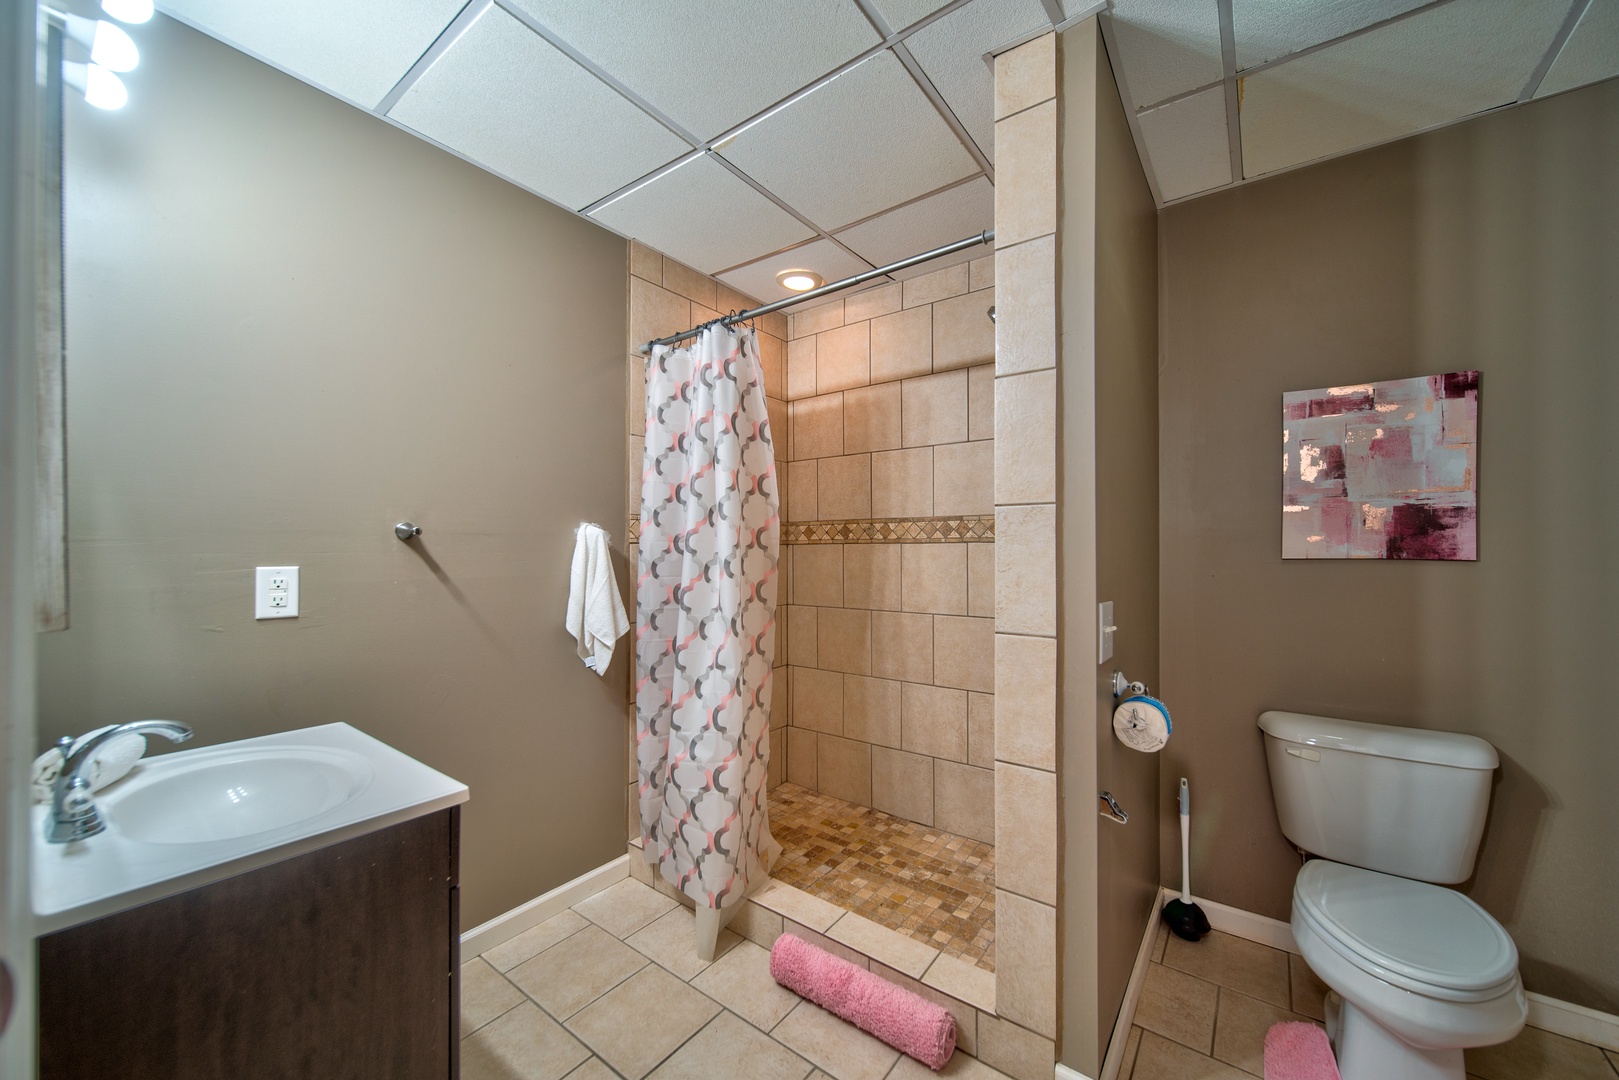 The lower level includes a full bathroom, offering a single vanity & shower